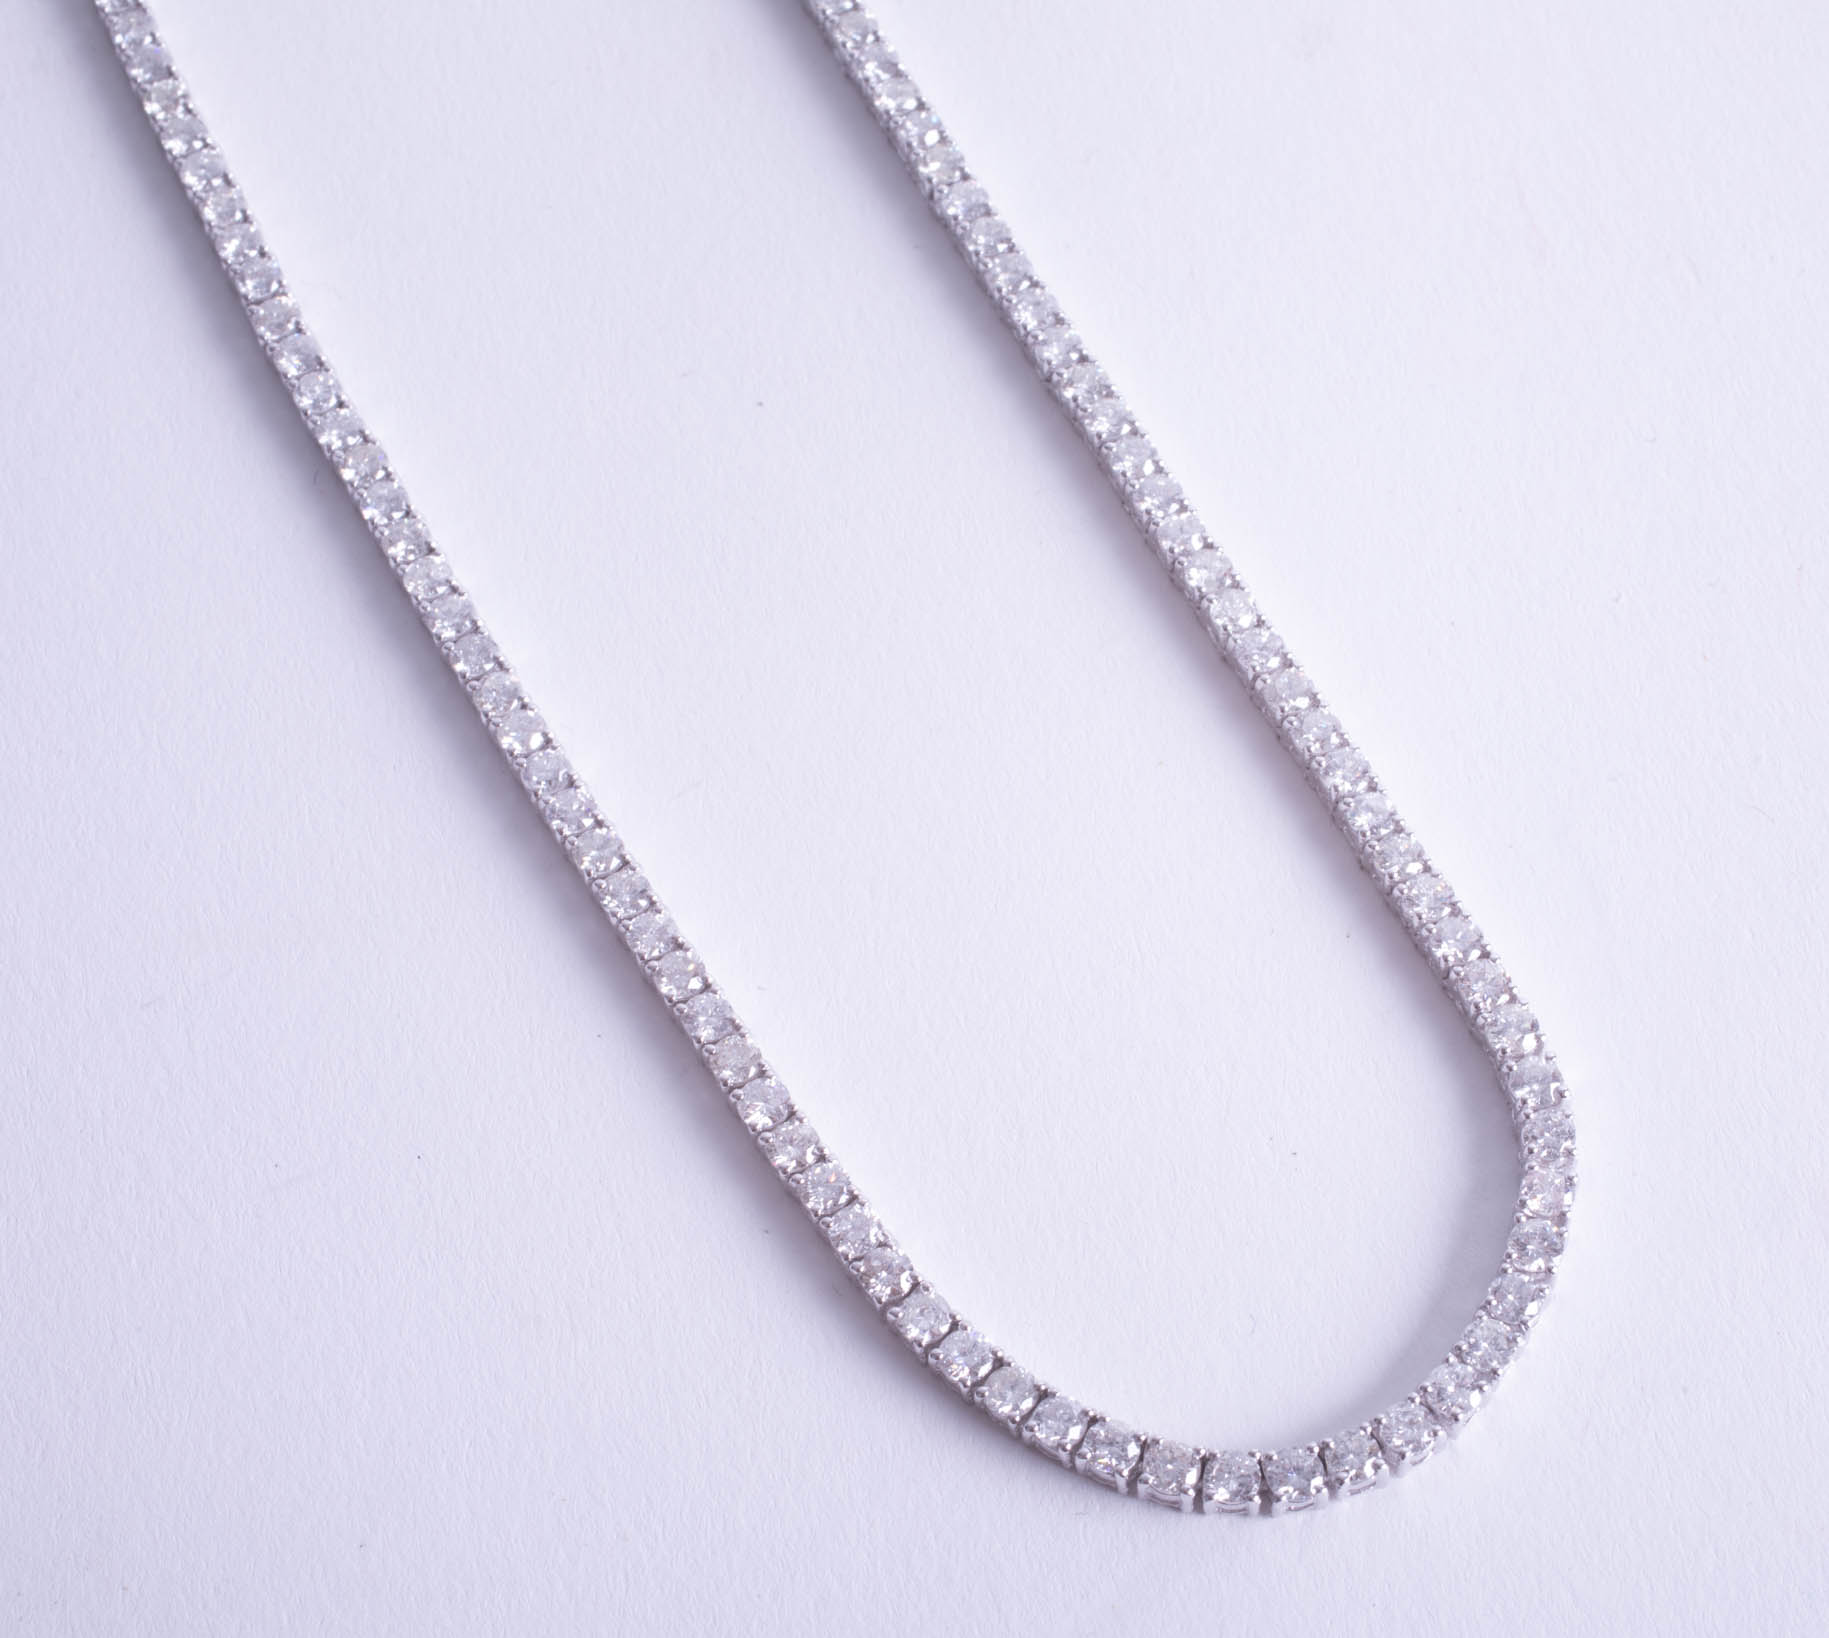 A stunning 18ct white gold necklace set with 155 diamonds, weight approx 18.30ct. - Image 4 of 10